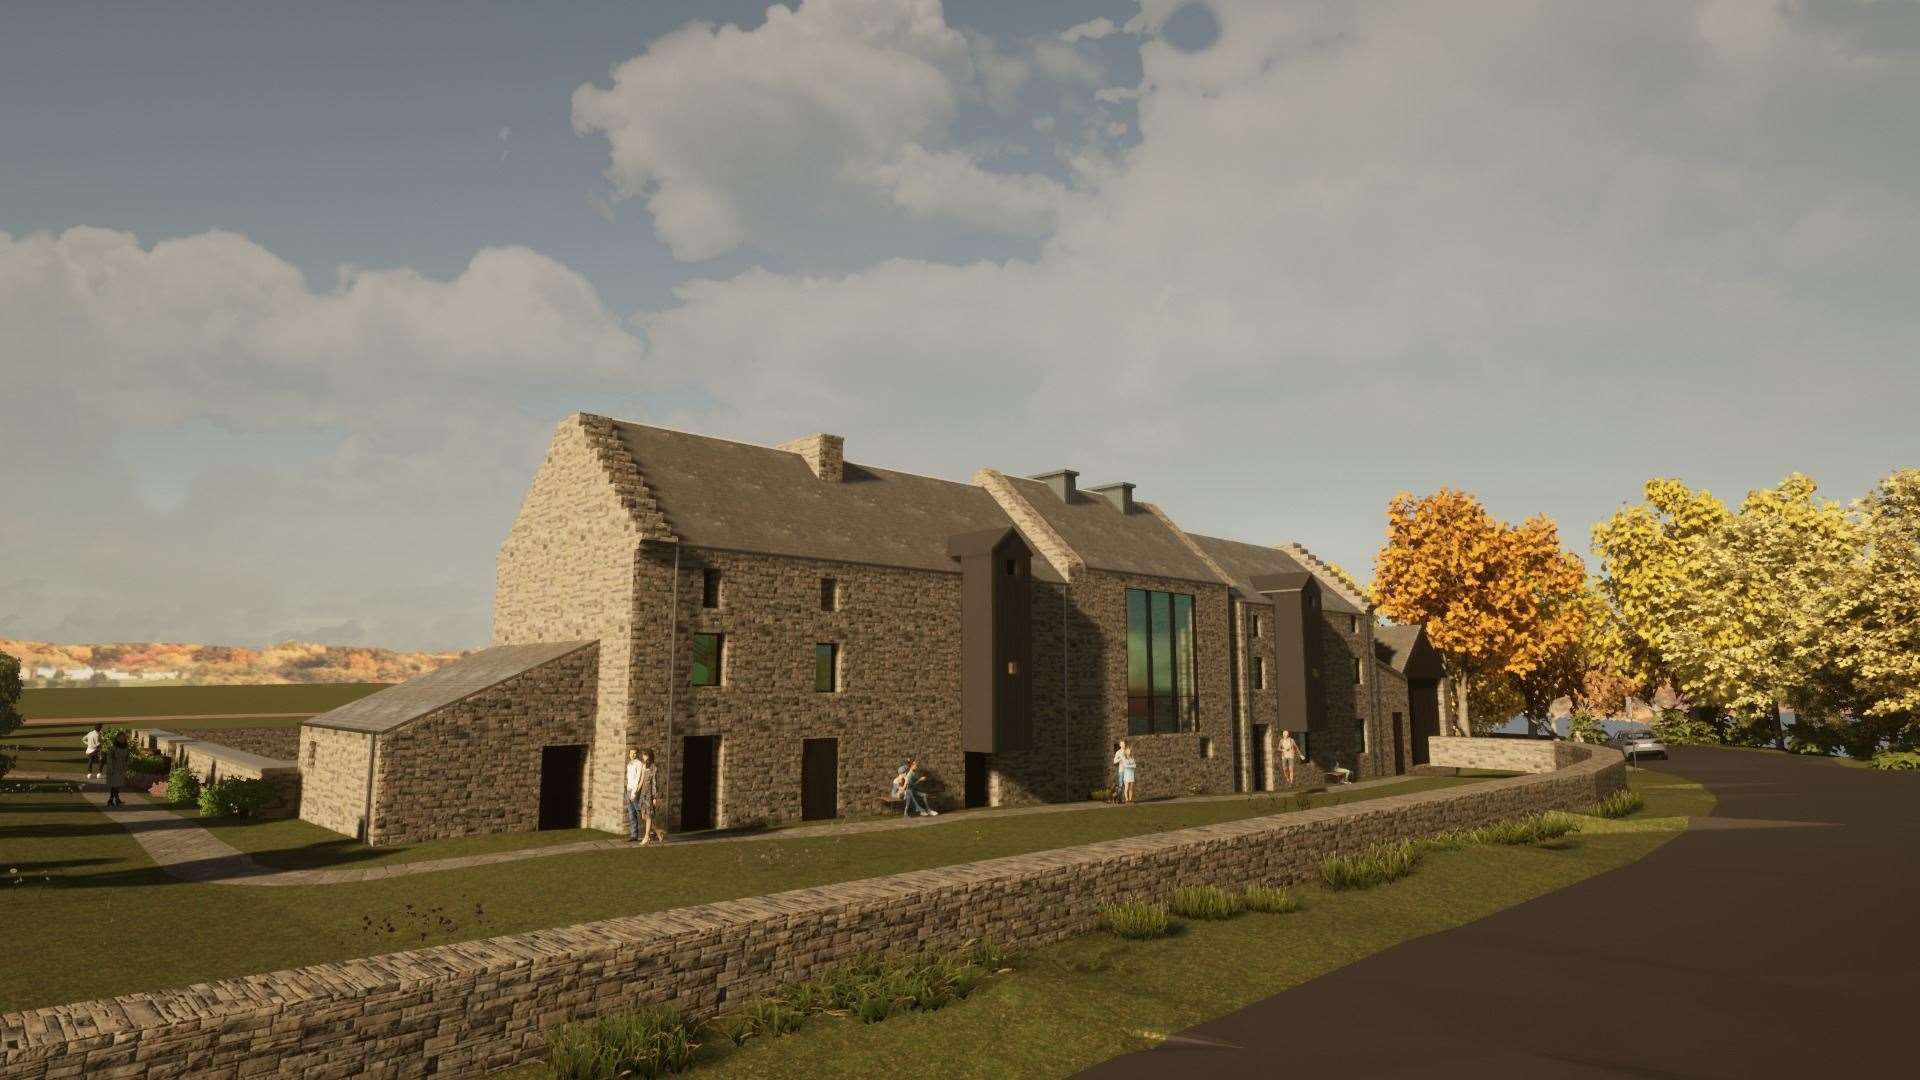 The proposals for Castletown Mill could see a £4 million investment and create 12 jobs. Image: Dunnet Bay Distillers / Organic Architects